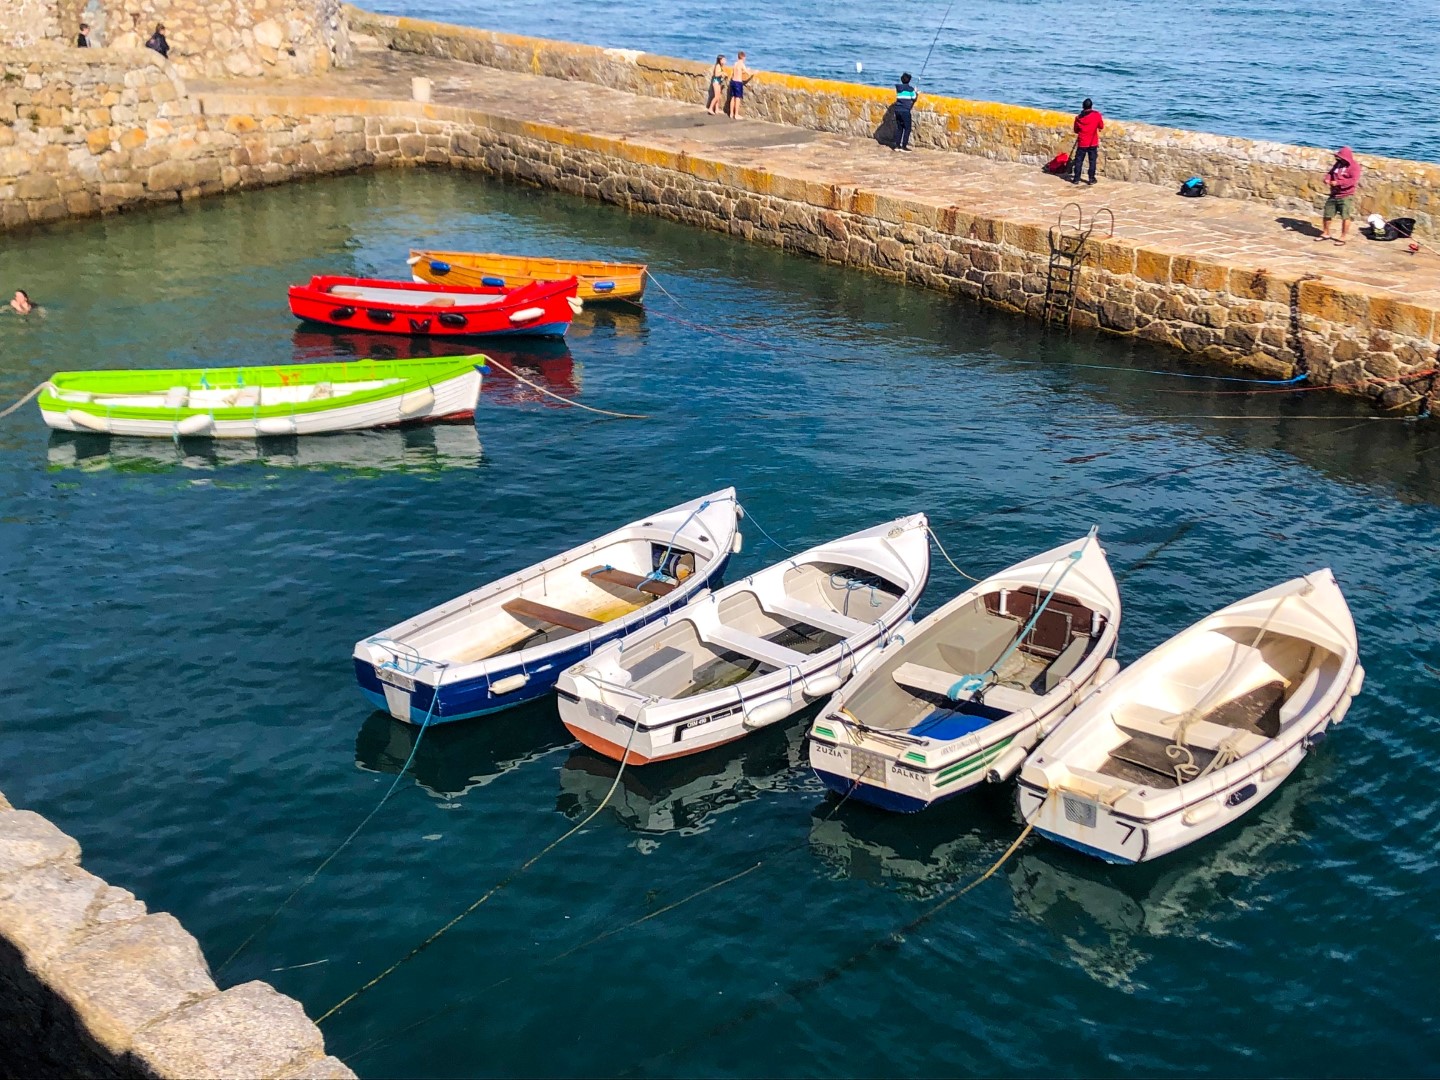 Dalkey boats on the water